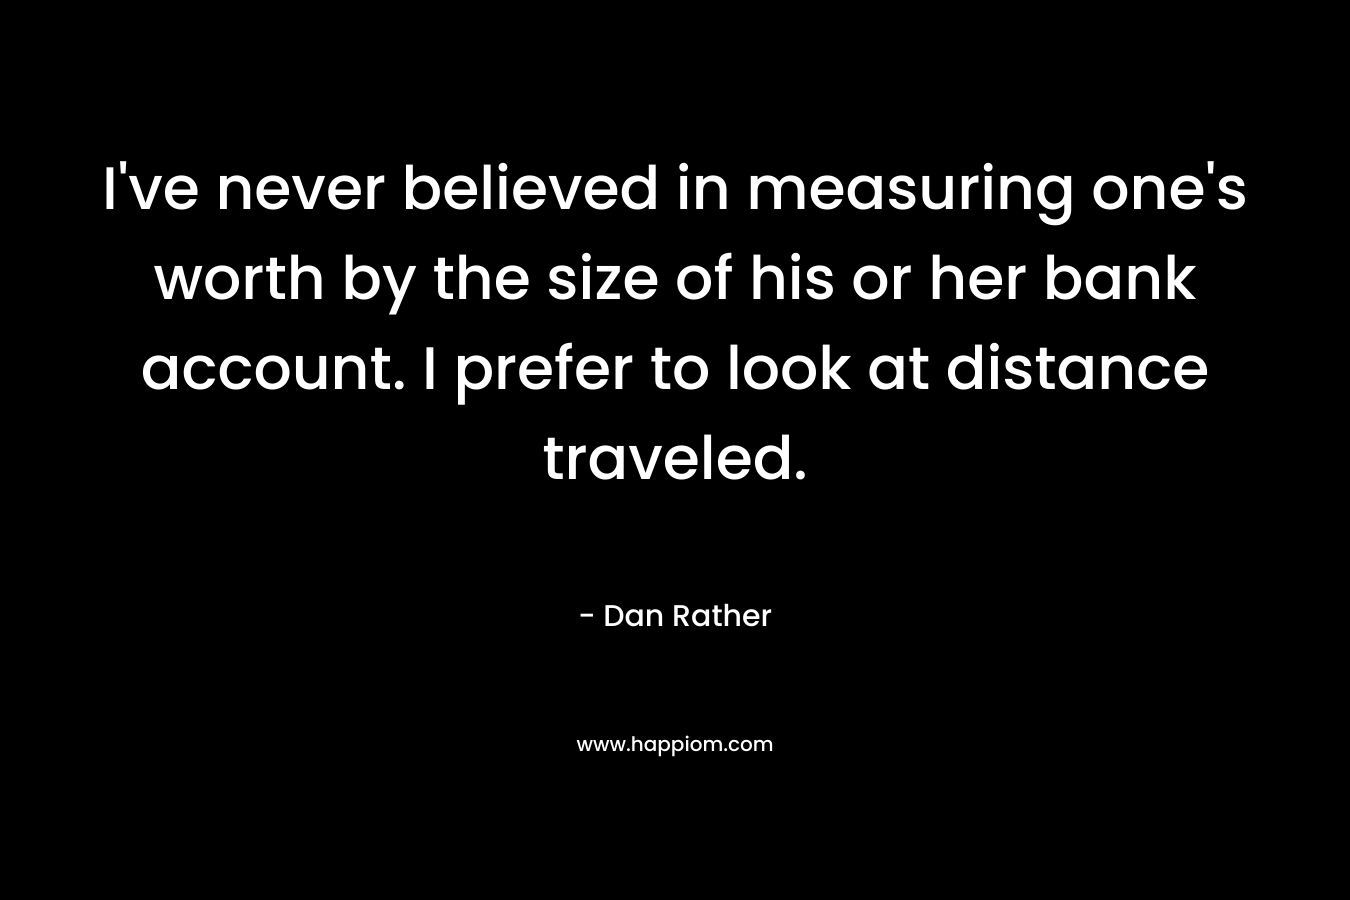 I’ve never believed in measuring one’s worth by the size of his or her bank account. I prefer to look at distance traveled. – Dan Rather